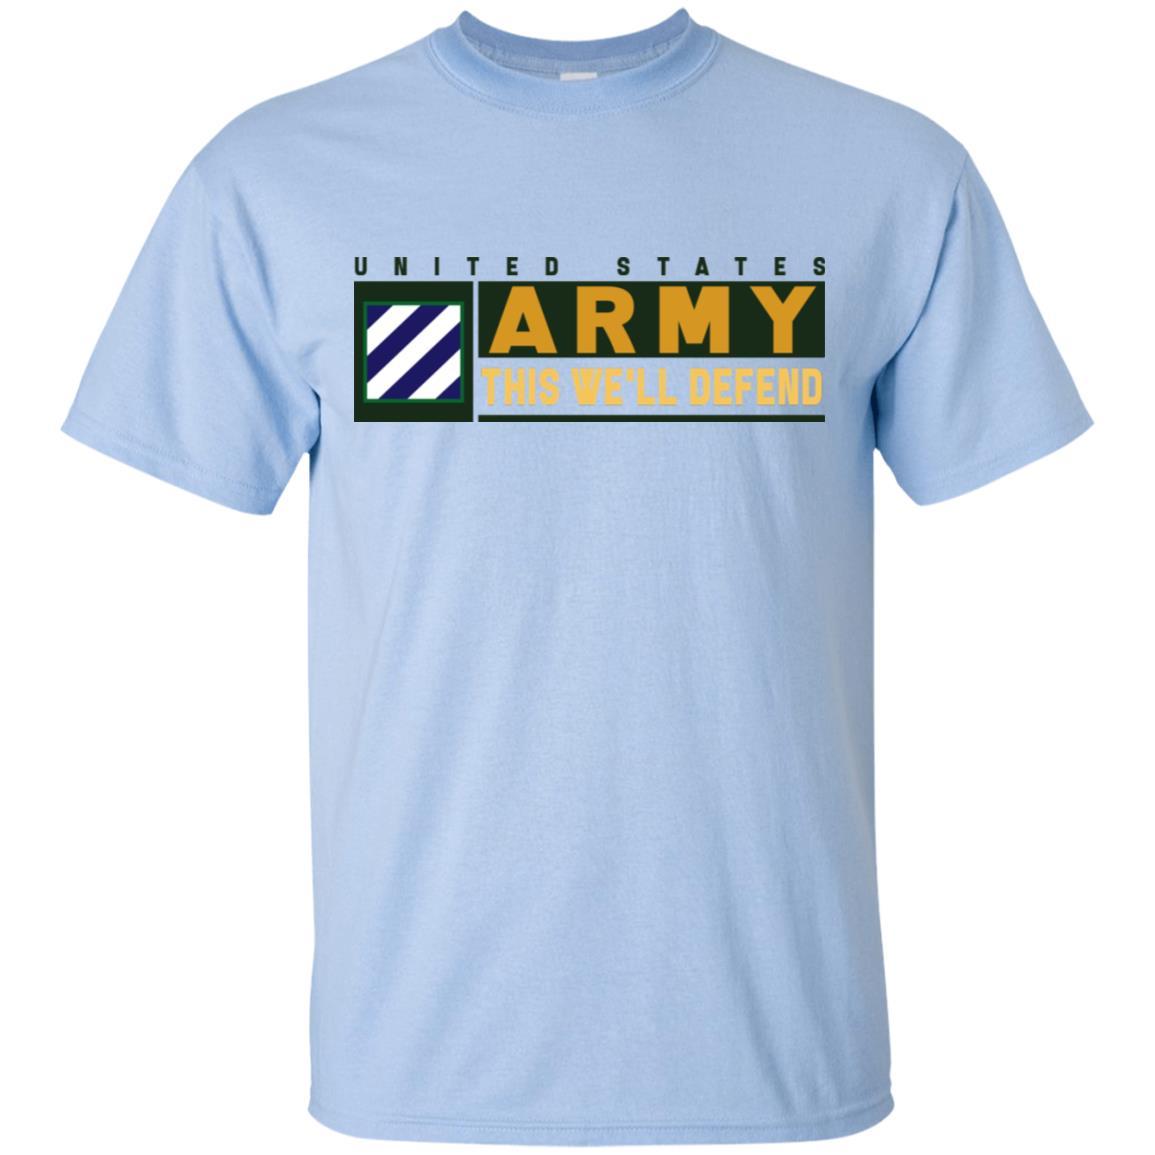 US Army 3rd Infantry Division,- This We'll Defend T-Shirt On Front For Men-TShirt-Army-Veterans Nation